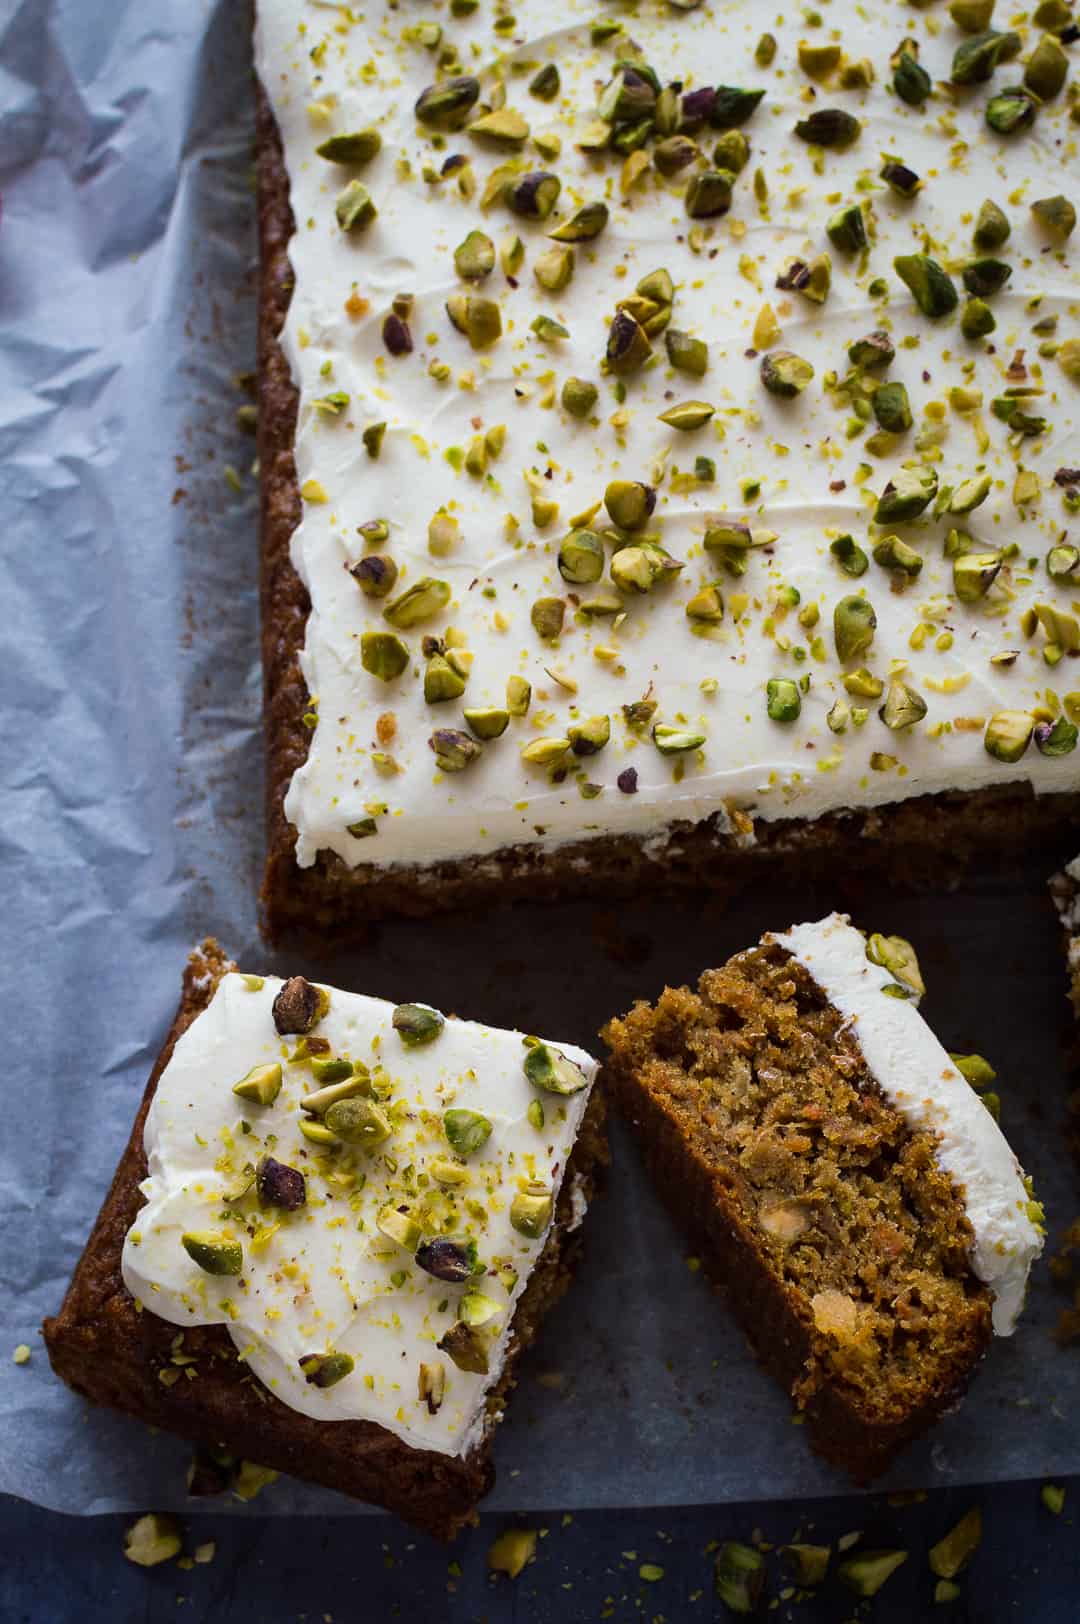 Carrot, pineapple and pistachio traybake topped with cream cheese icing and chopped pistachios.